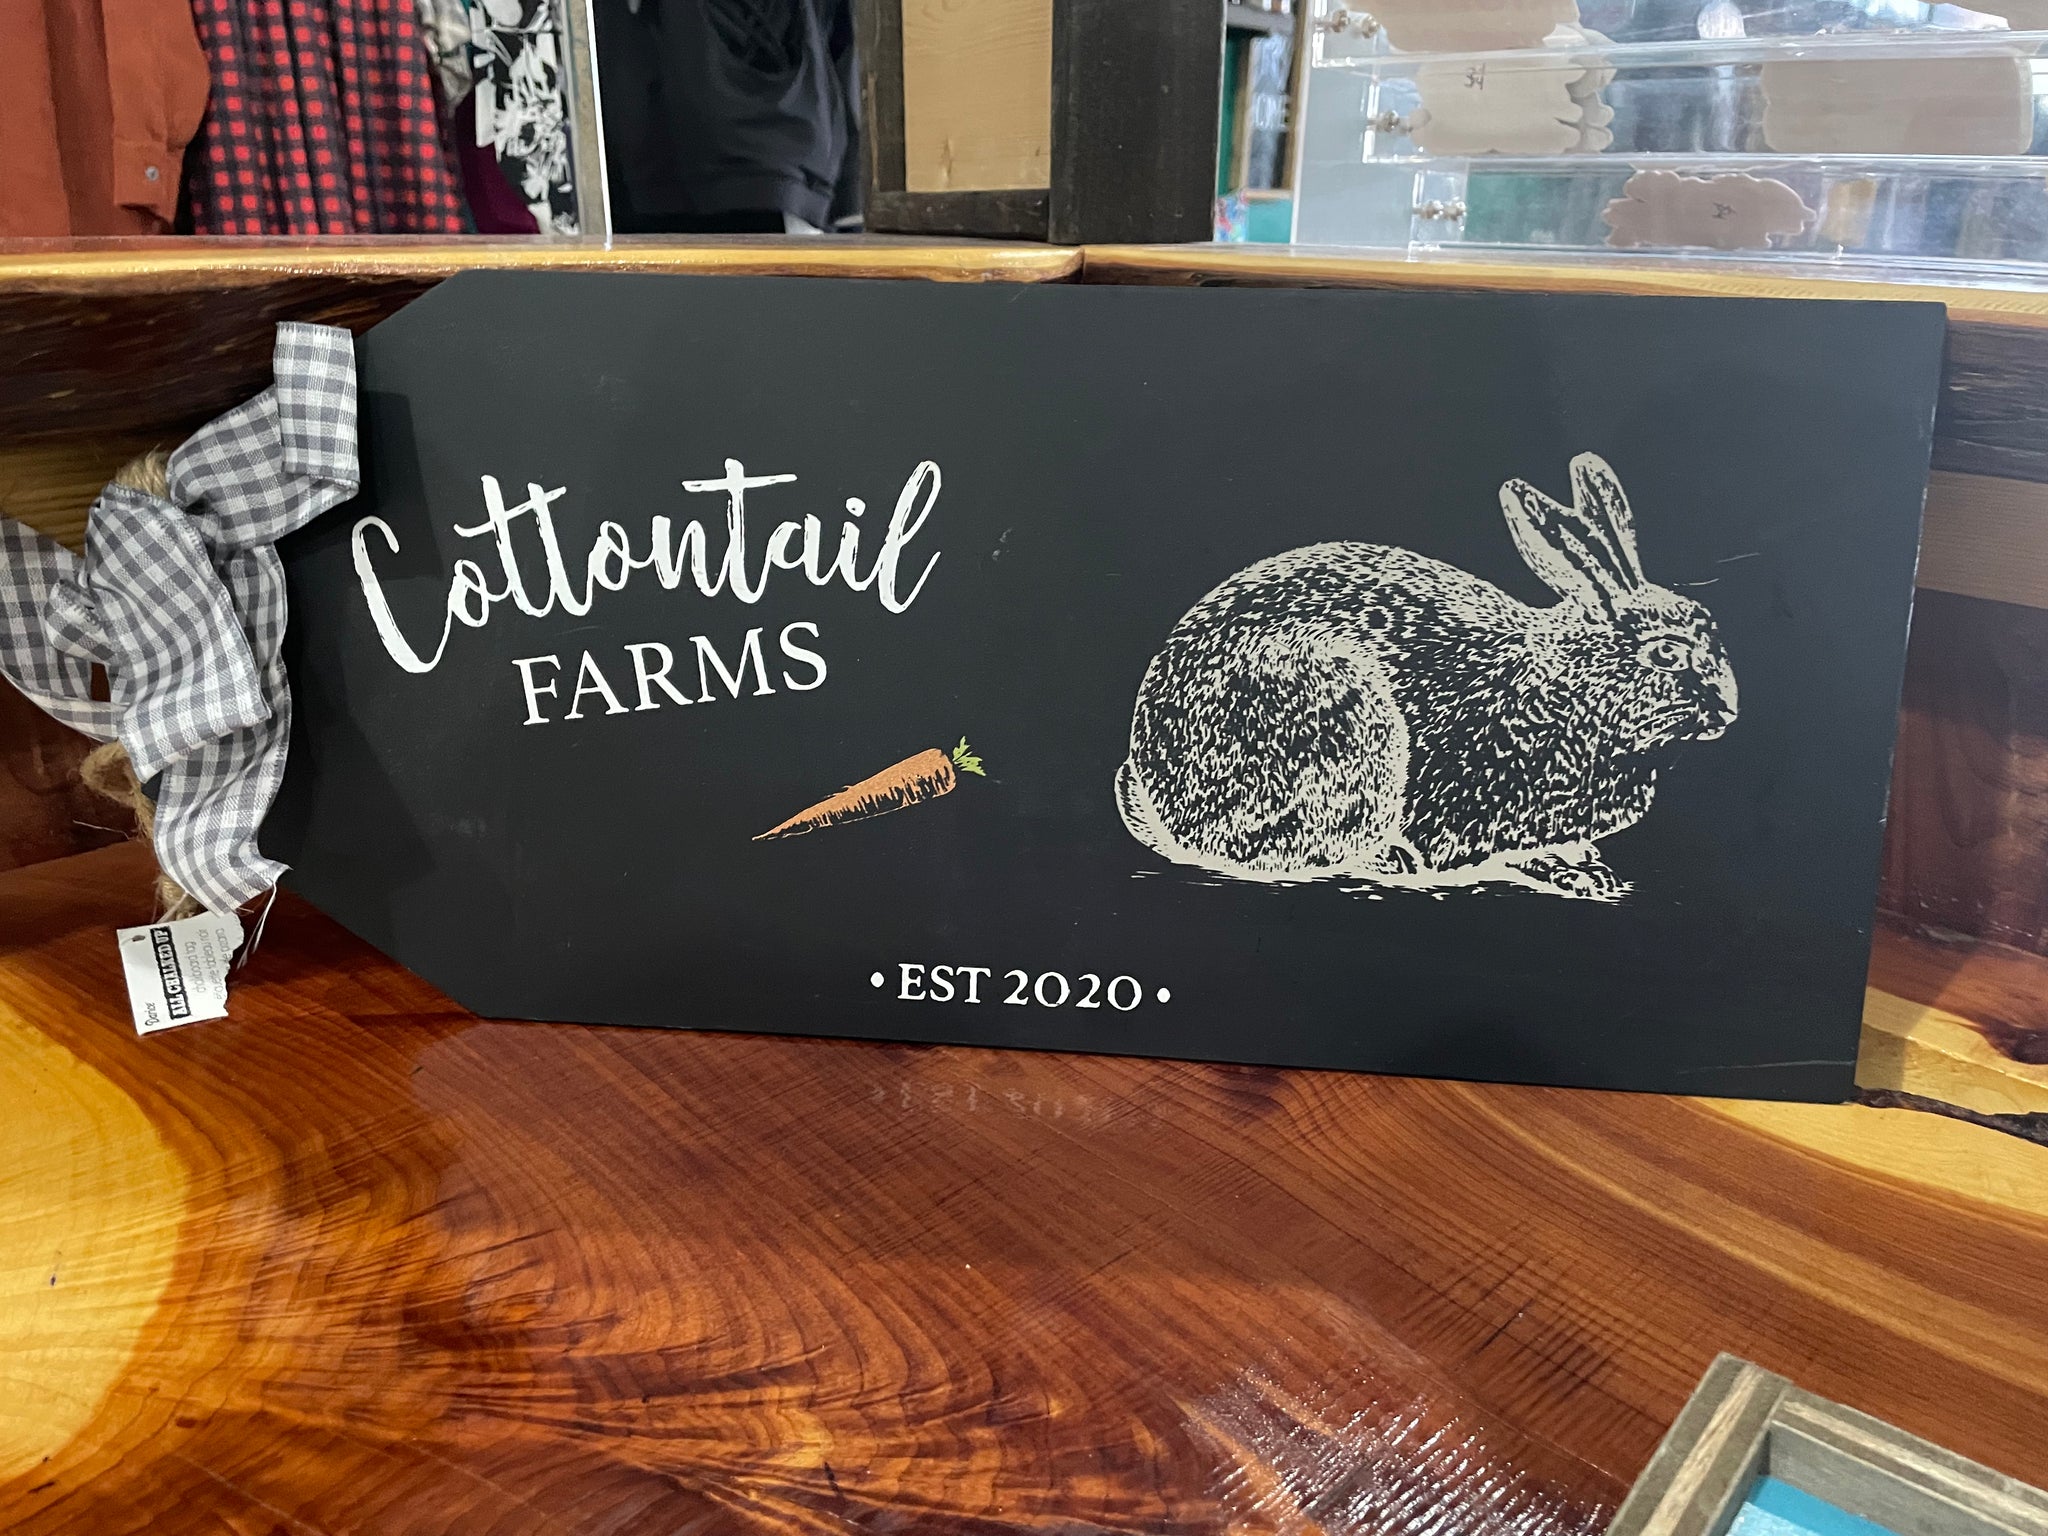 Cottontail Farms Sign